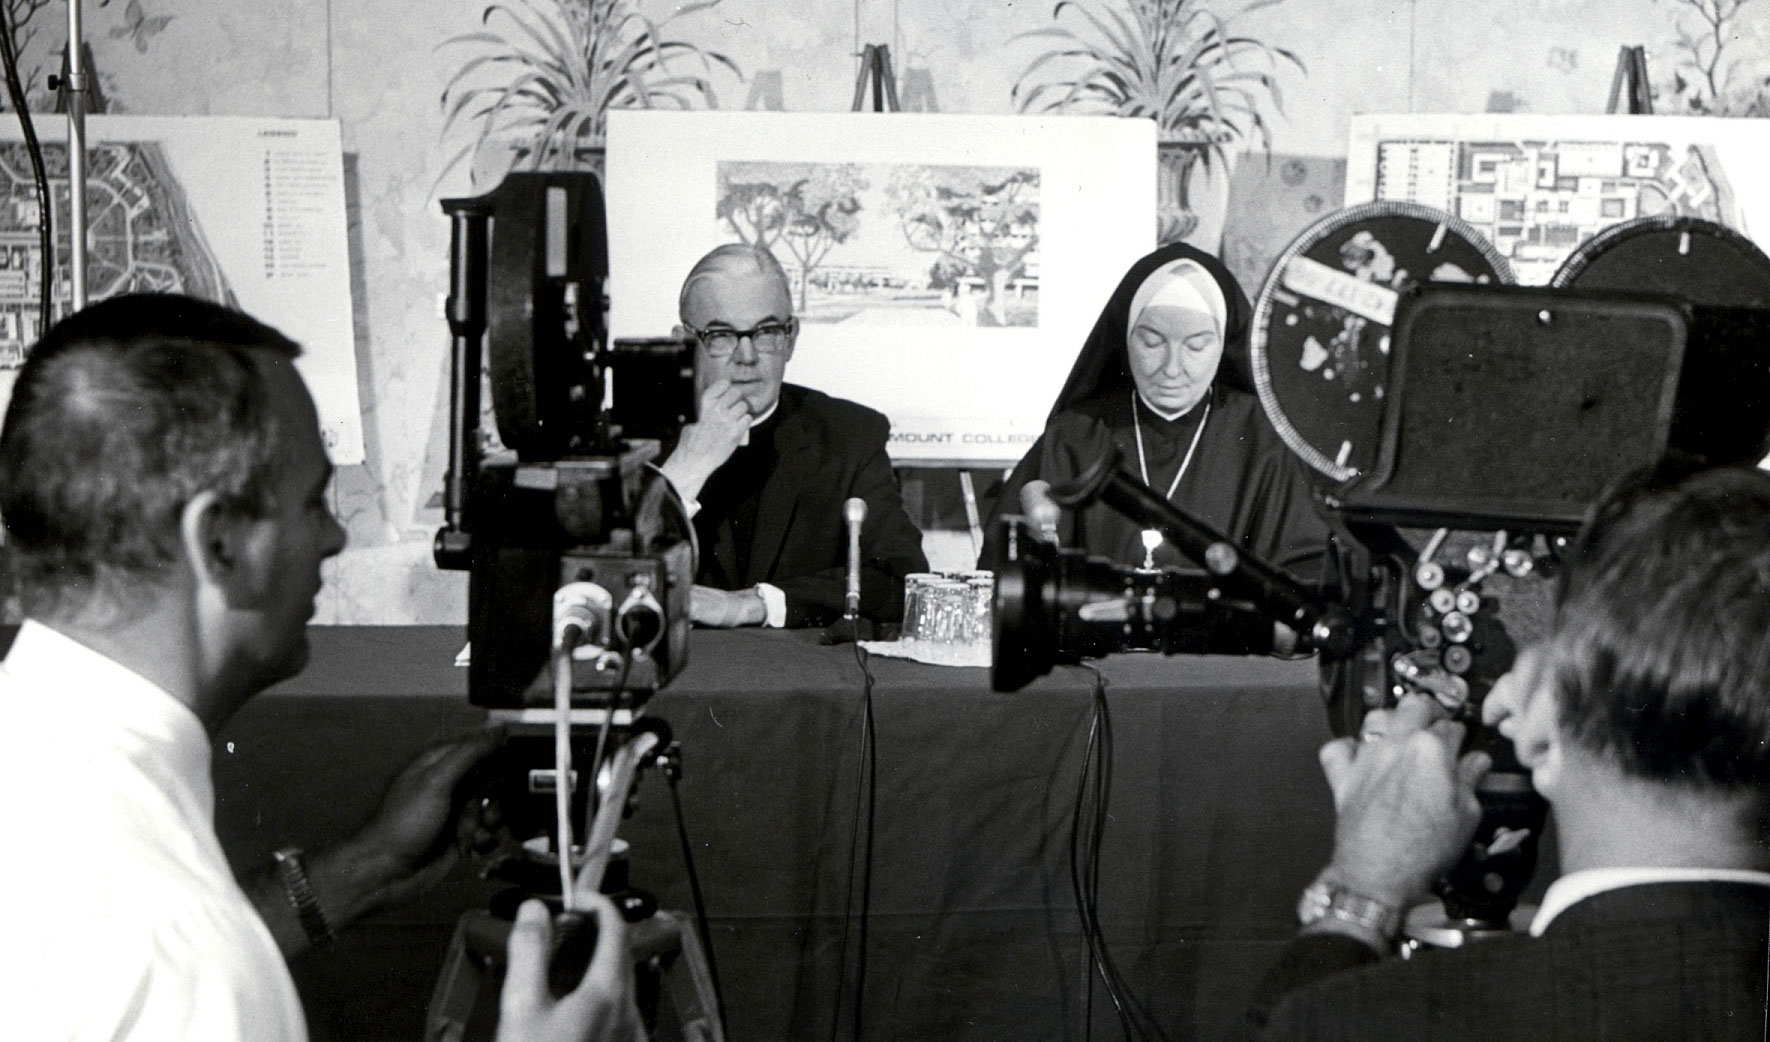 A black and white photo from the press conference in 1973 about the merger of Loyola and Marymount.